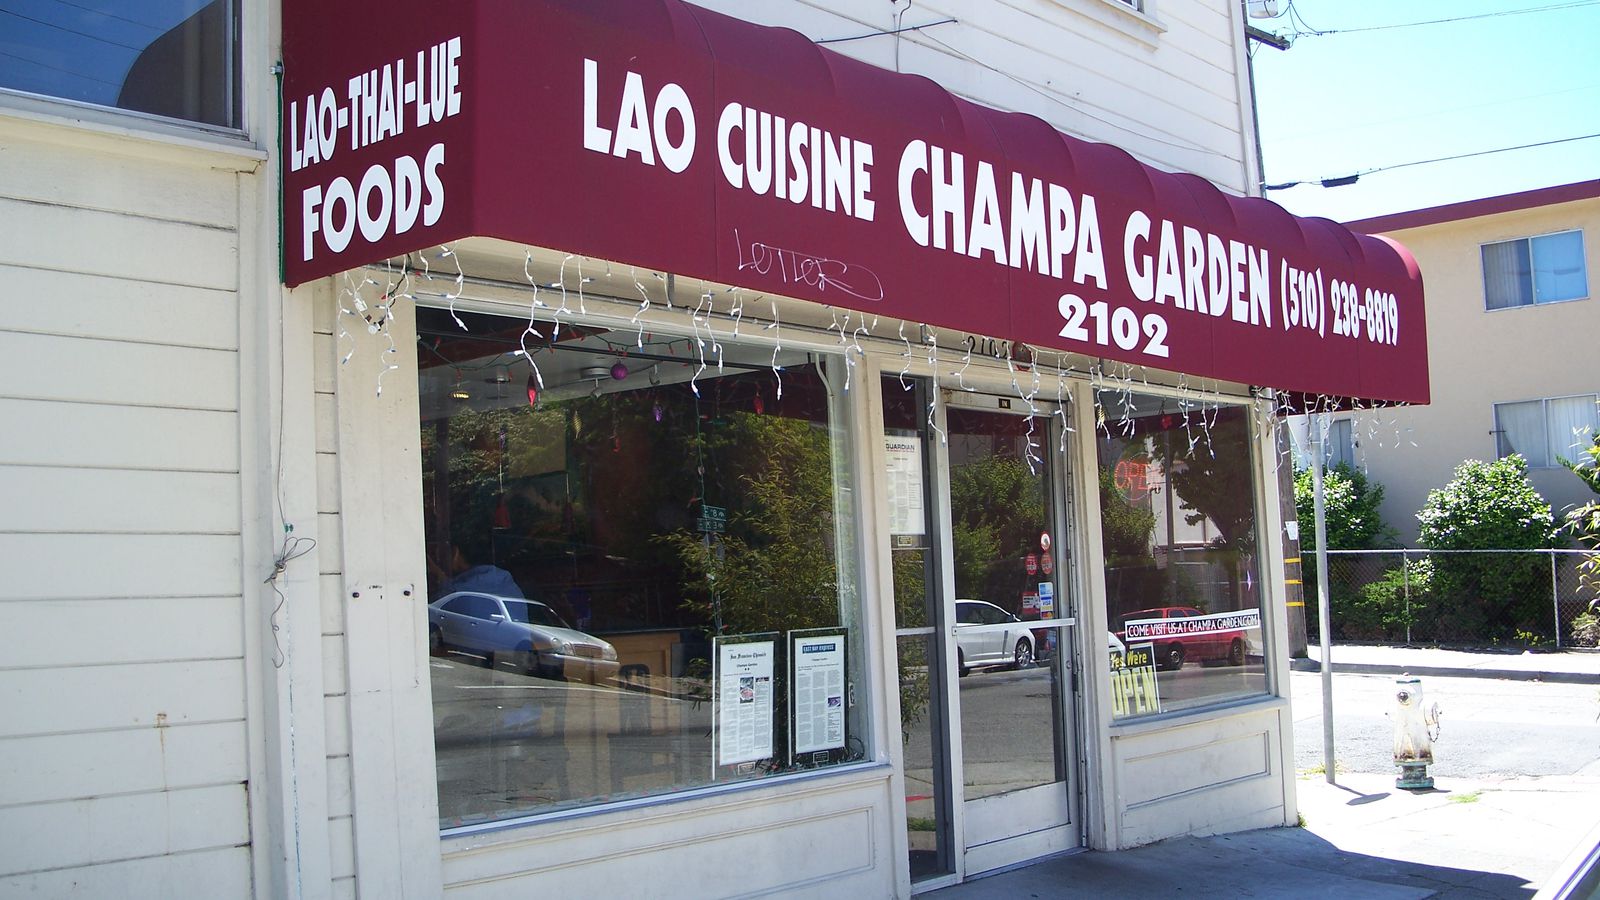 Champa Garden May Expand Stuffed Hits Indiegogo - Eater Sf